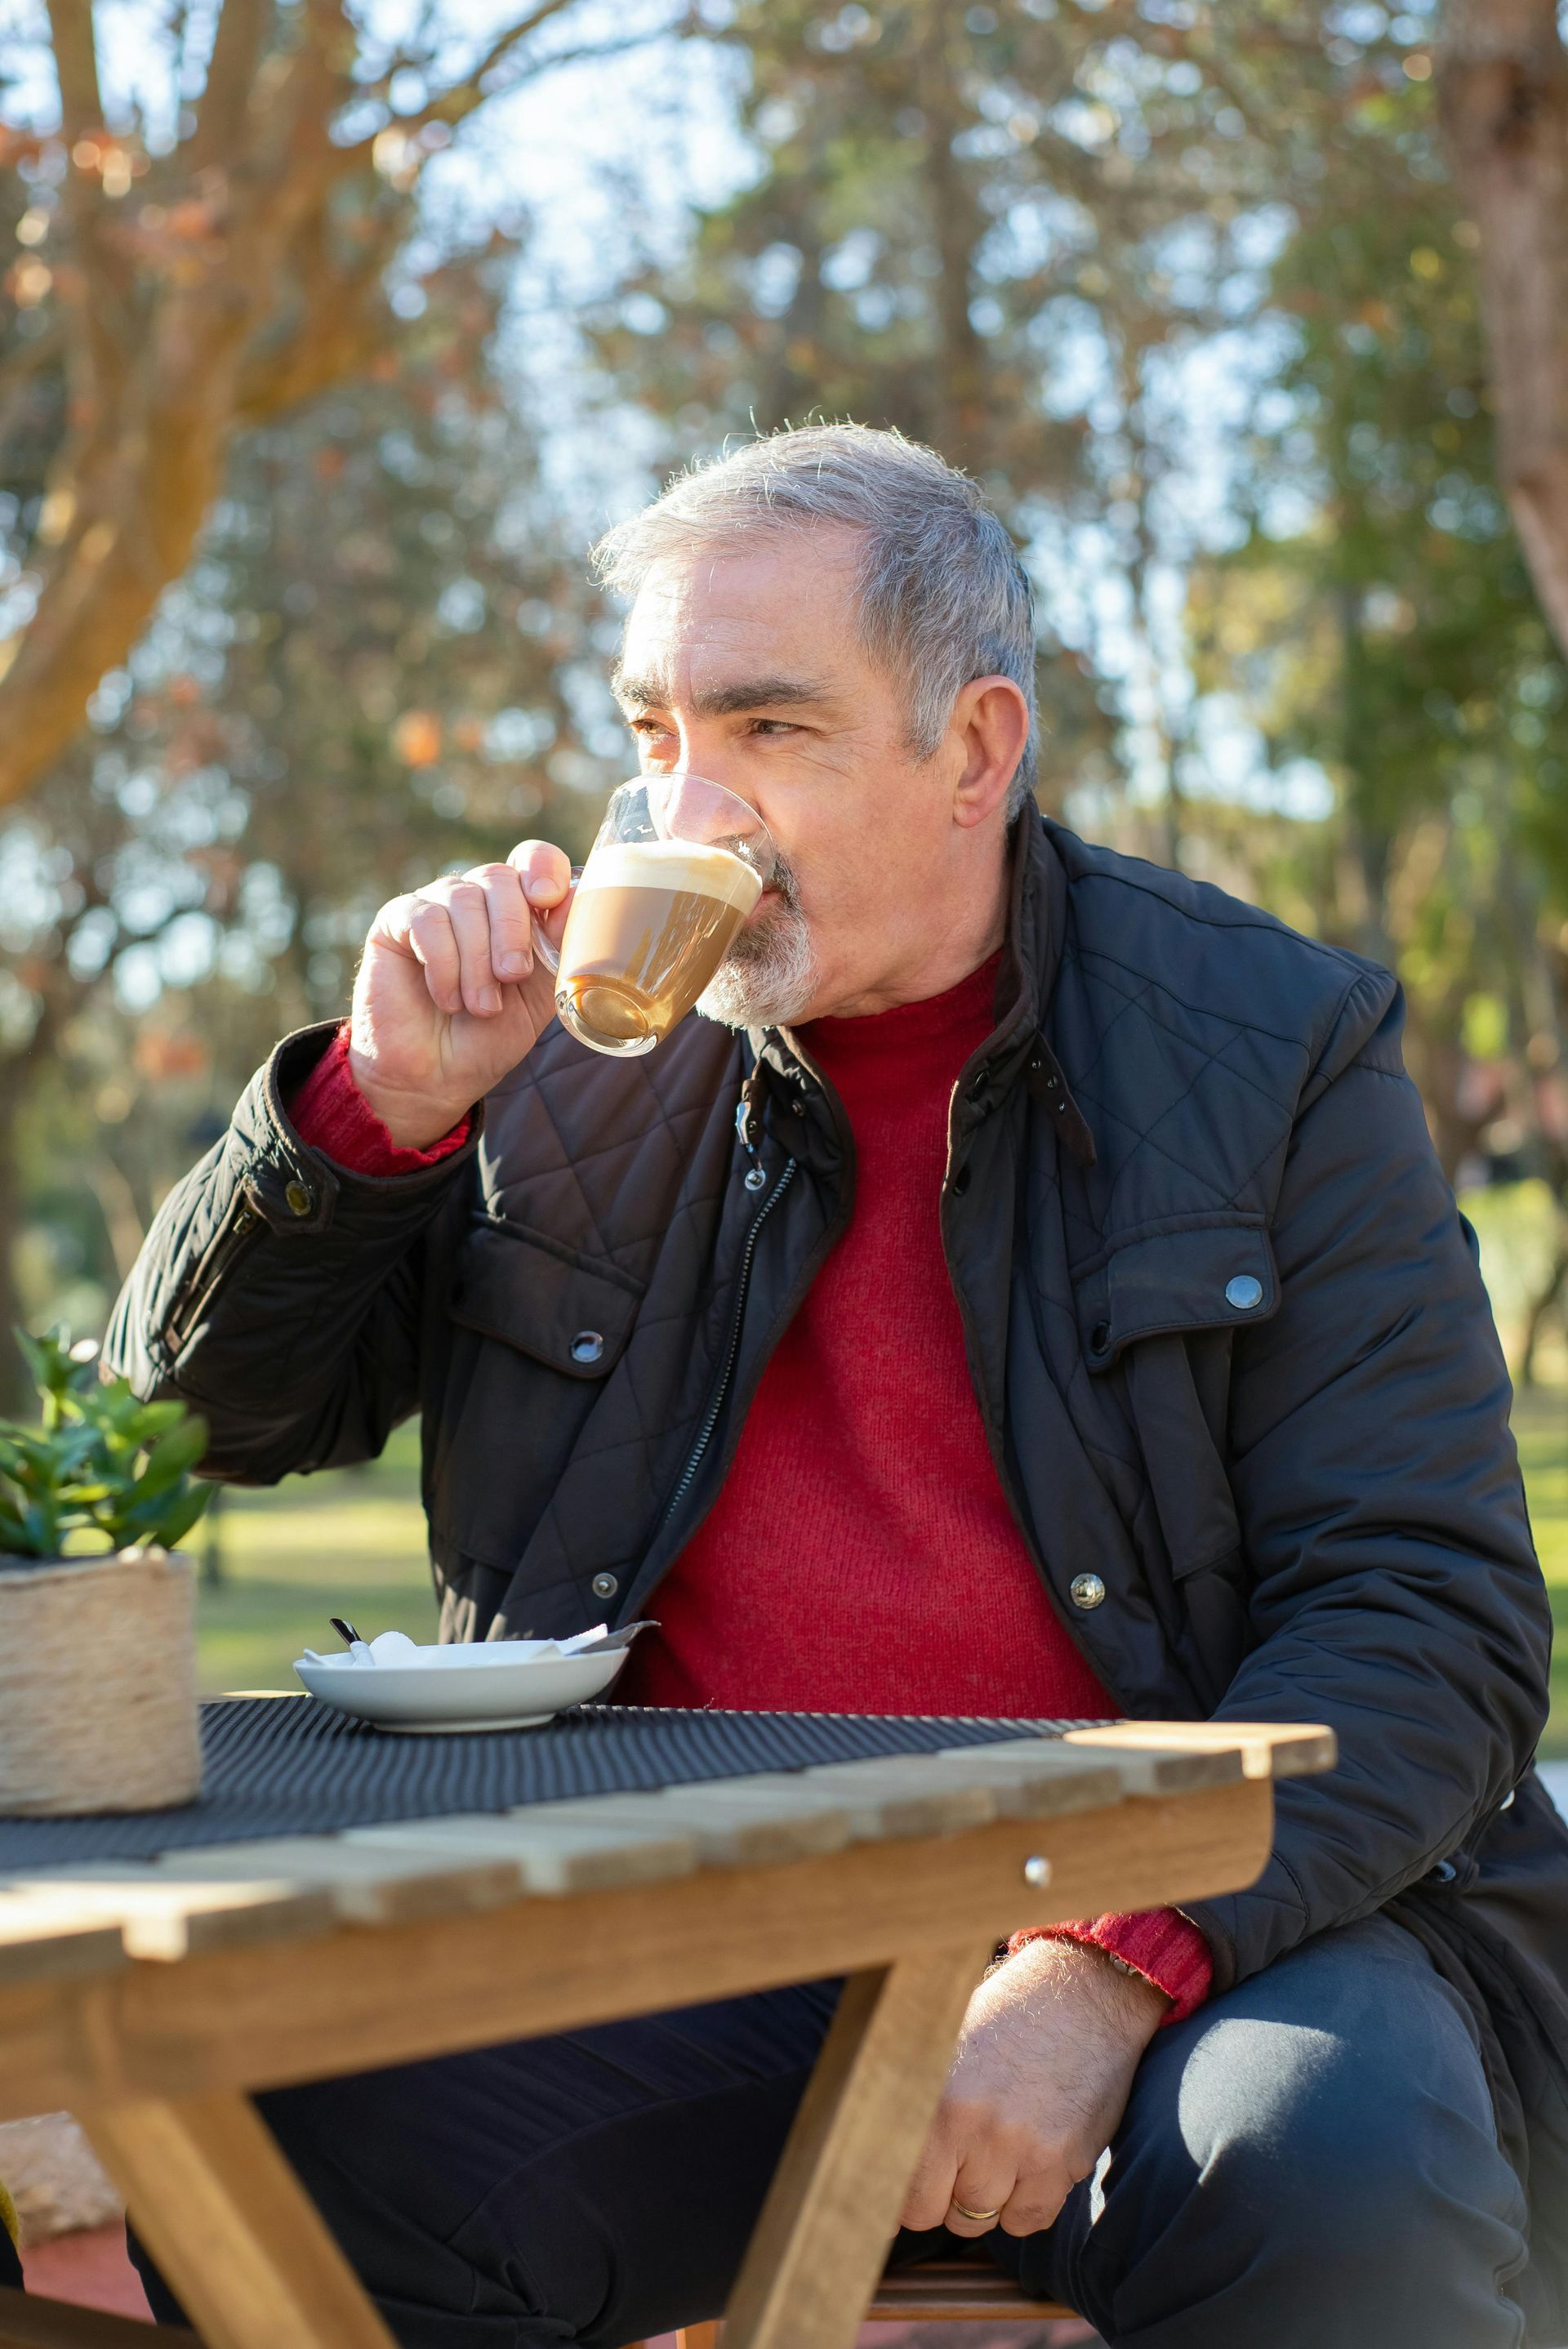 A man is sitting at a picnic table drinking a cup of coffee.